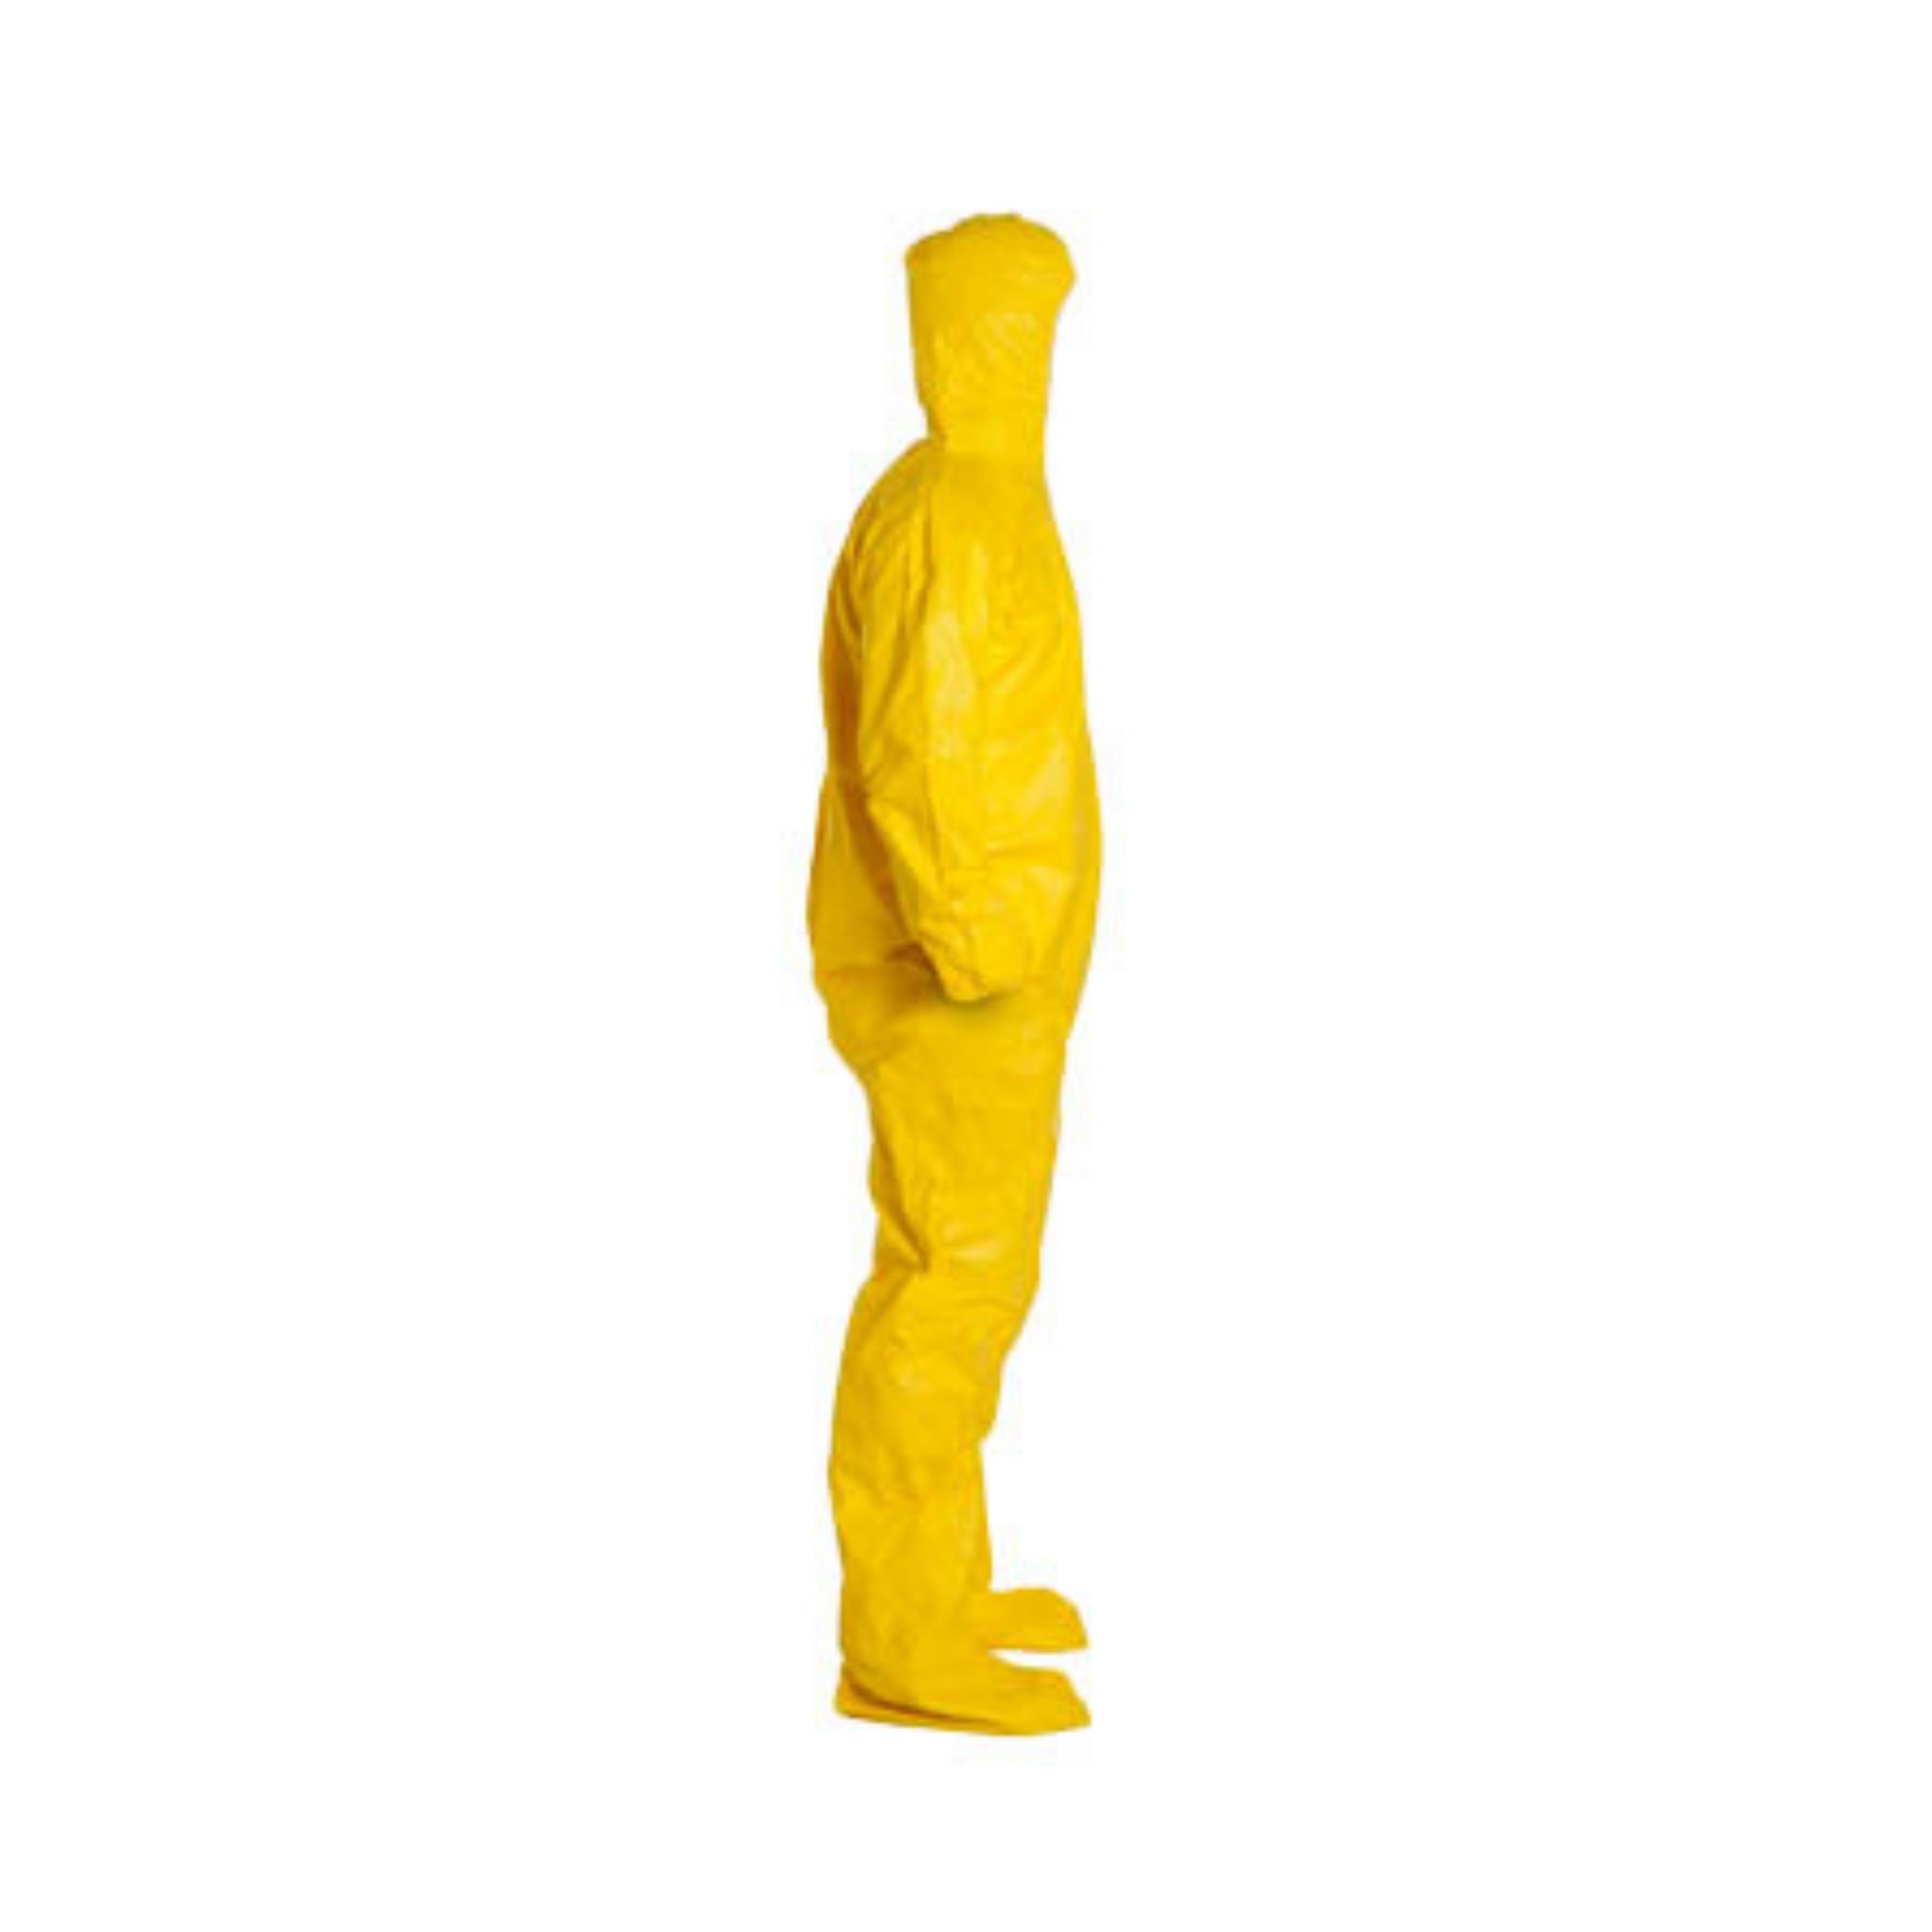 DuPont QC122S - Case of 12: Tychem 2000 Standard Fit Hood, Booties Stormflap Elastic Wrists and Ankles Serged Seam, Yellow,